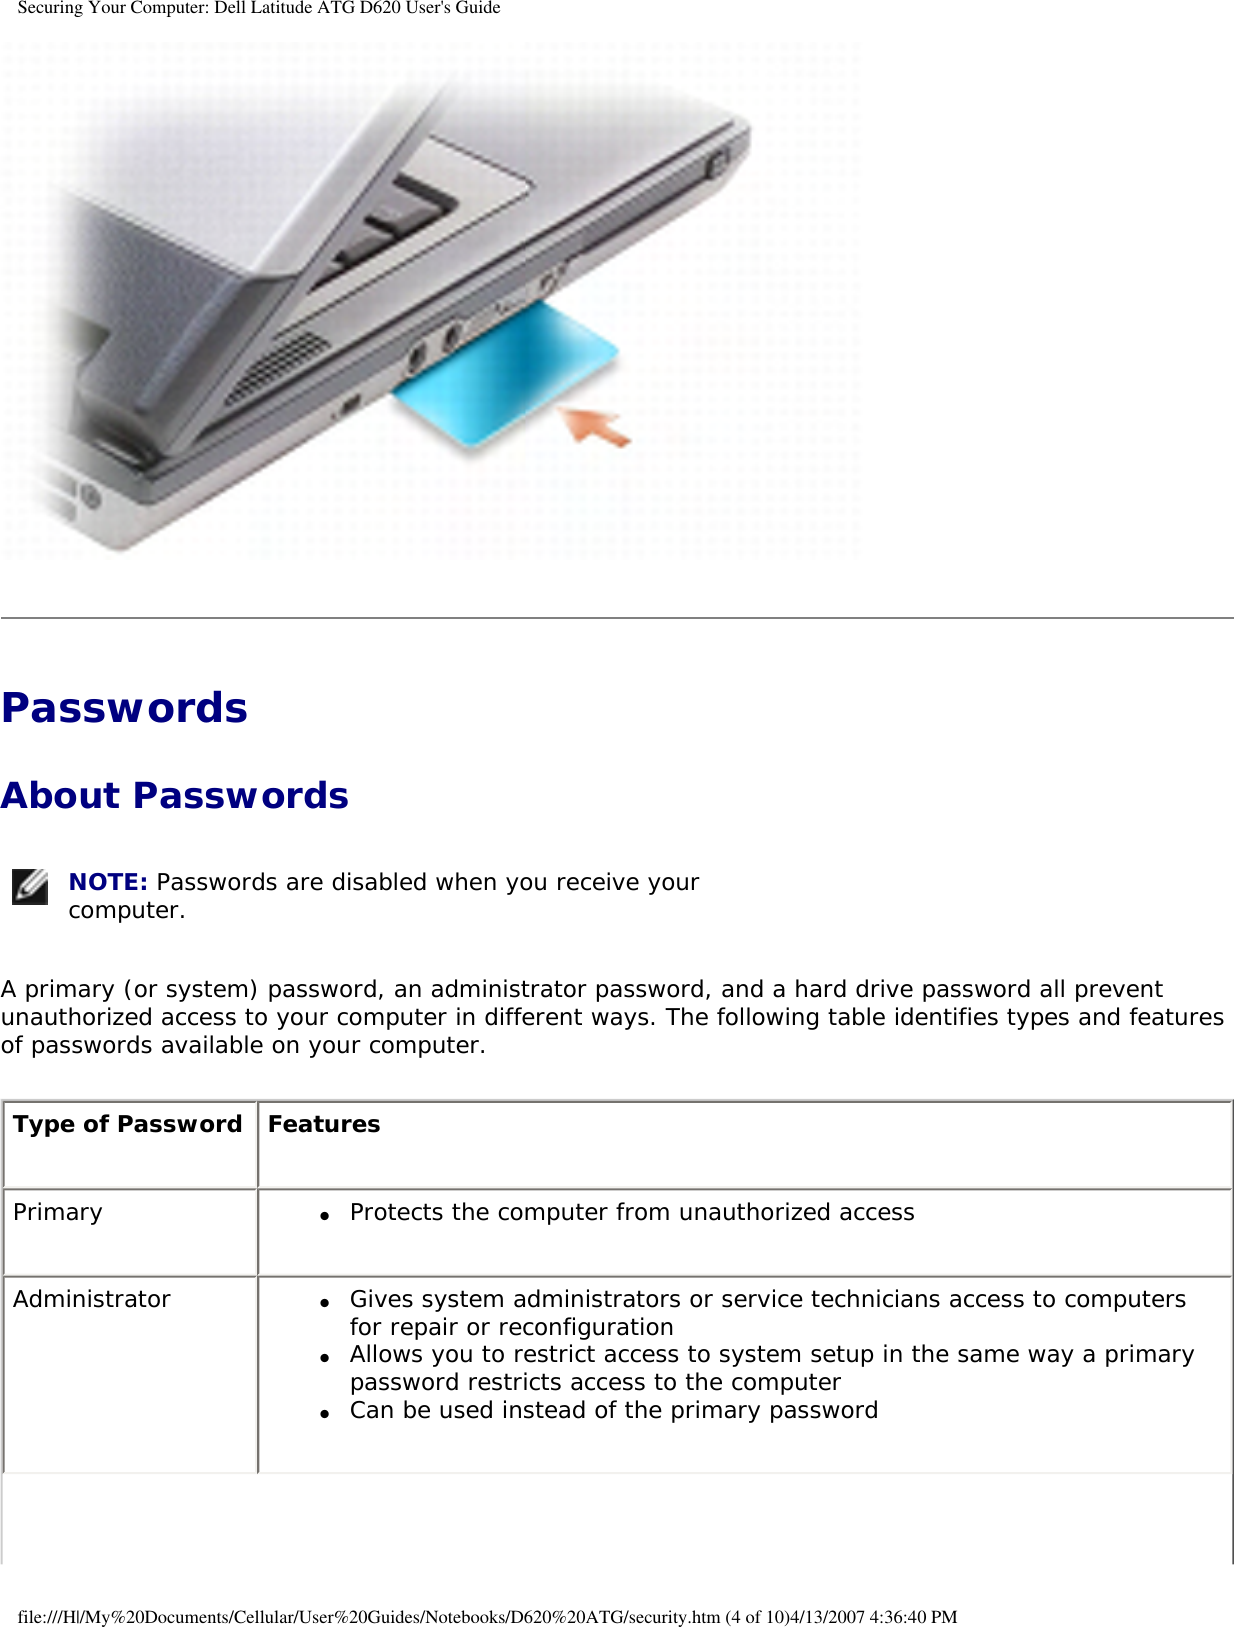 Securing Your Computer: Dell Latitude ATG D620 User&apos;s Guide Passwords About Passwords NOTE: Passwords are disabled when you receive your computer. A primary (or system) password, an administrator password, and a hard drive password all prevent unauthorized access to your computer in different ways. The following table identifies types and features of passwords available on your computer.Type of Password FeaturesPrimary ●     Protects the computer from unauthorized accessAdministrator ●     Gives system administrators or service technicians access to computers for repair or reconfiguration●     Allows you to restrict access to system setup in the same way a primary password restricts access to the computer●     Can be used instead of the primary passwordfile:///H|/My%20Documents/Cellular/User%20Guides/Notebooks/D620%20ATG/security.htm (4 of 10)4/13/2007 4:36:40 PM